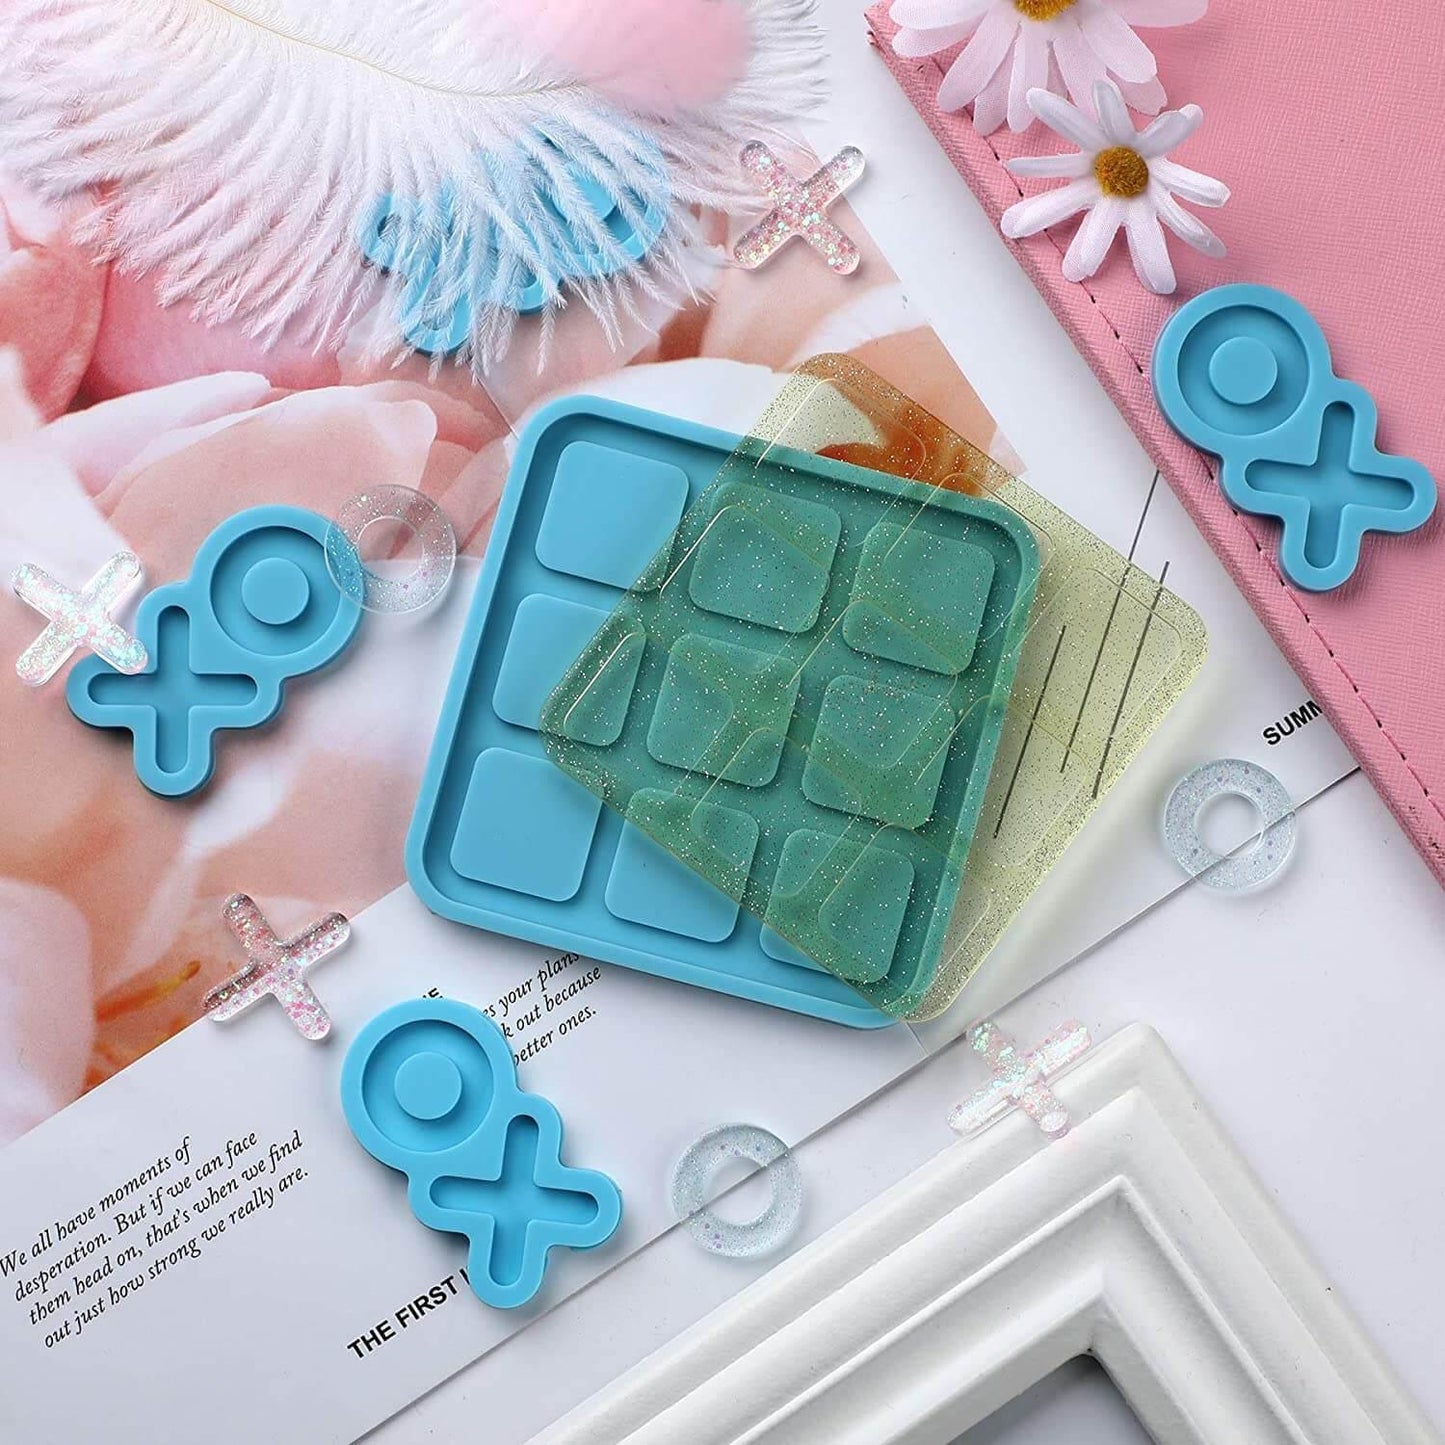 Tic Tac Toe Resin Mold with 4 Chess Pieces Molds - IntoResin